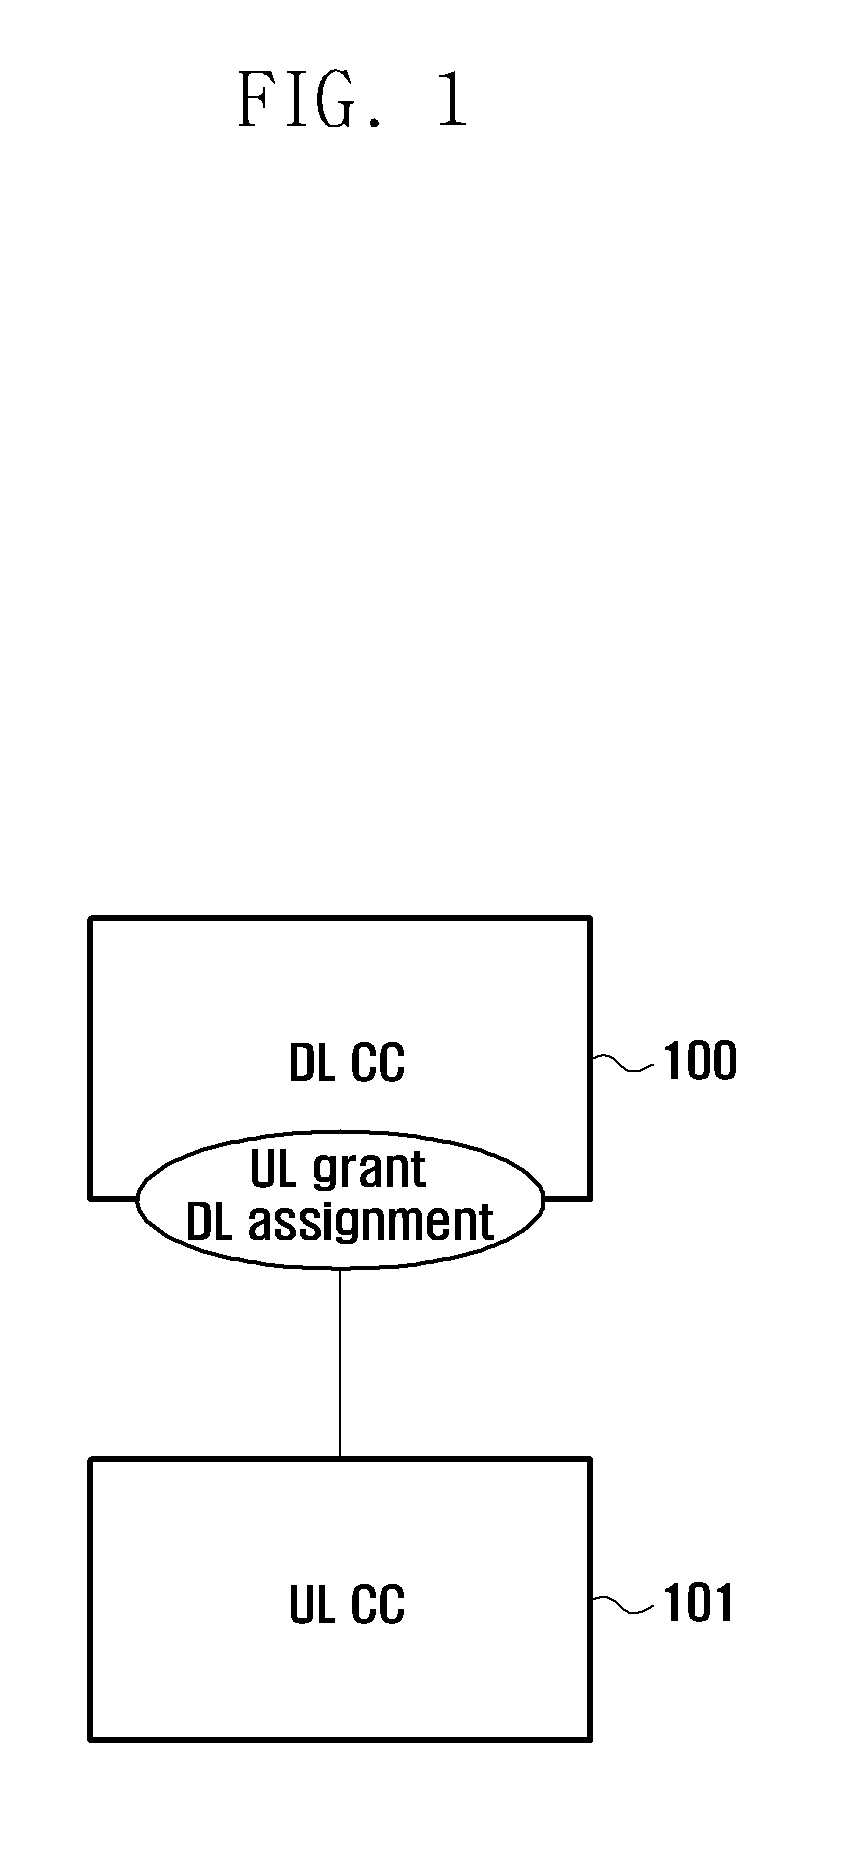 Channel state information request/feedback method and apparatus